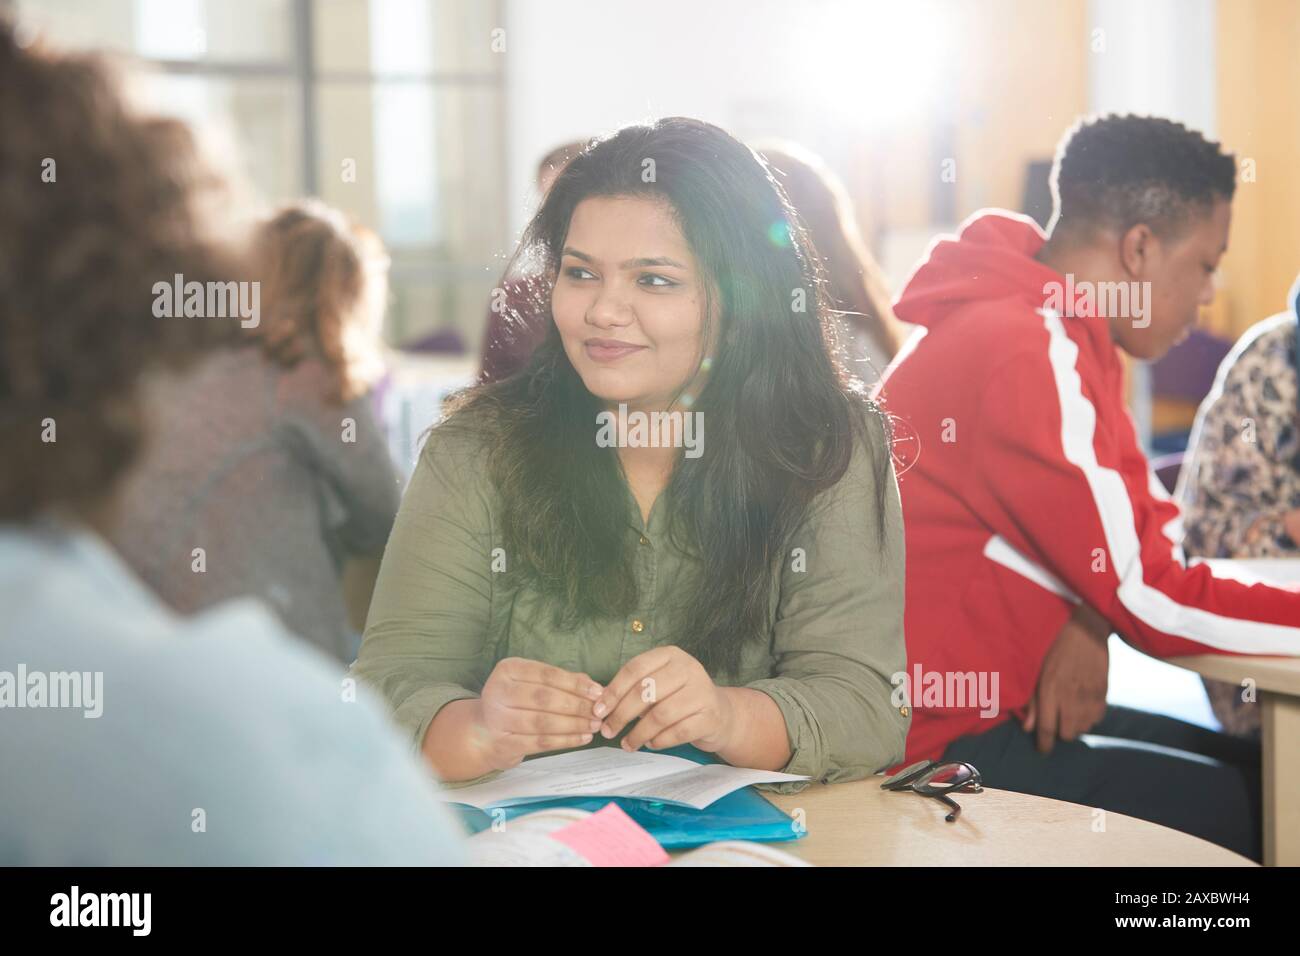 Smiling young female college student studying with classmates Stock Photo